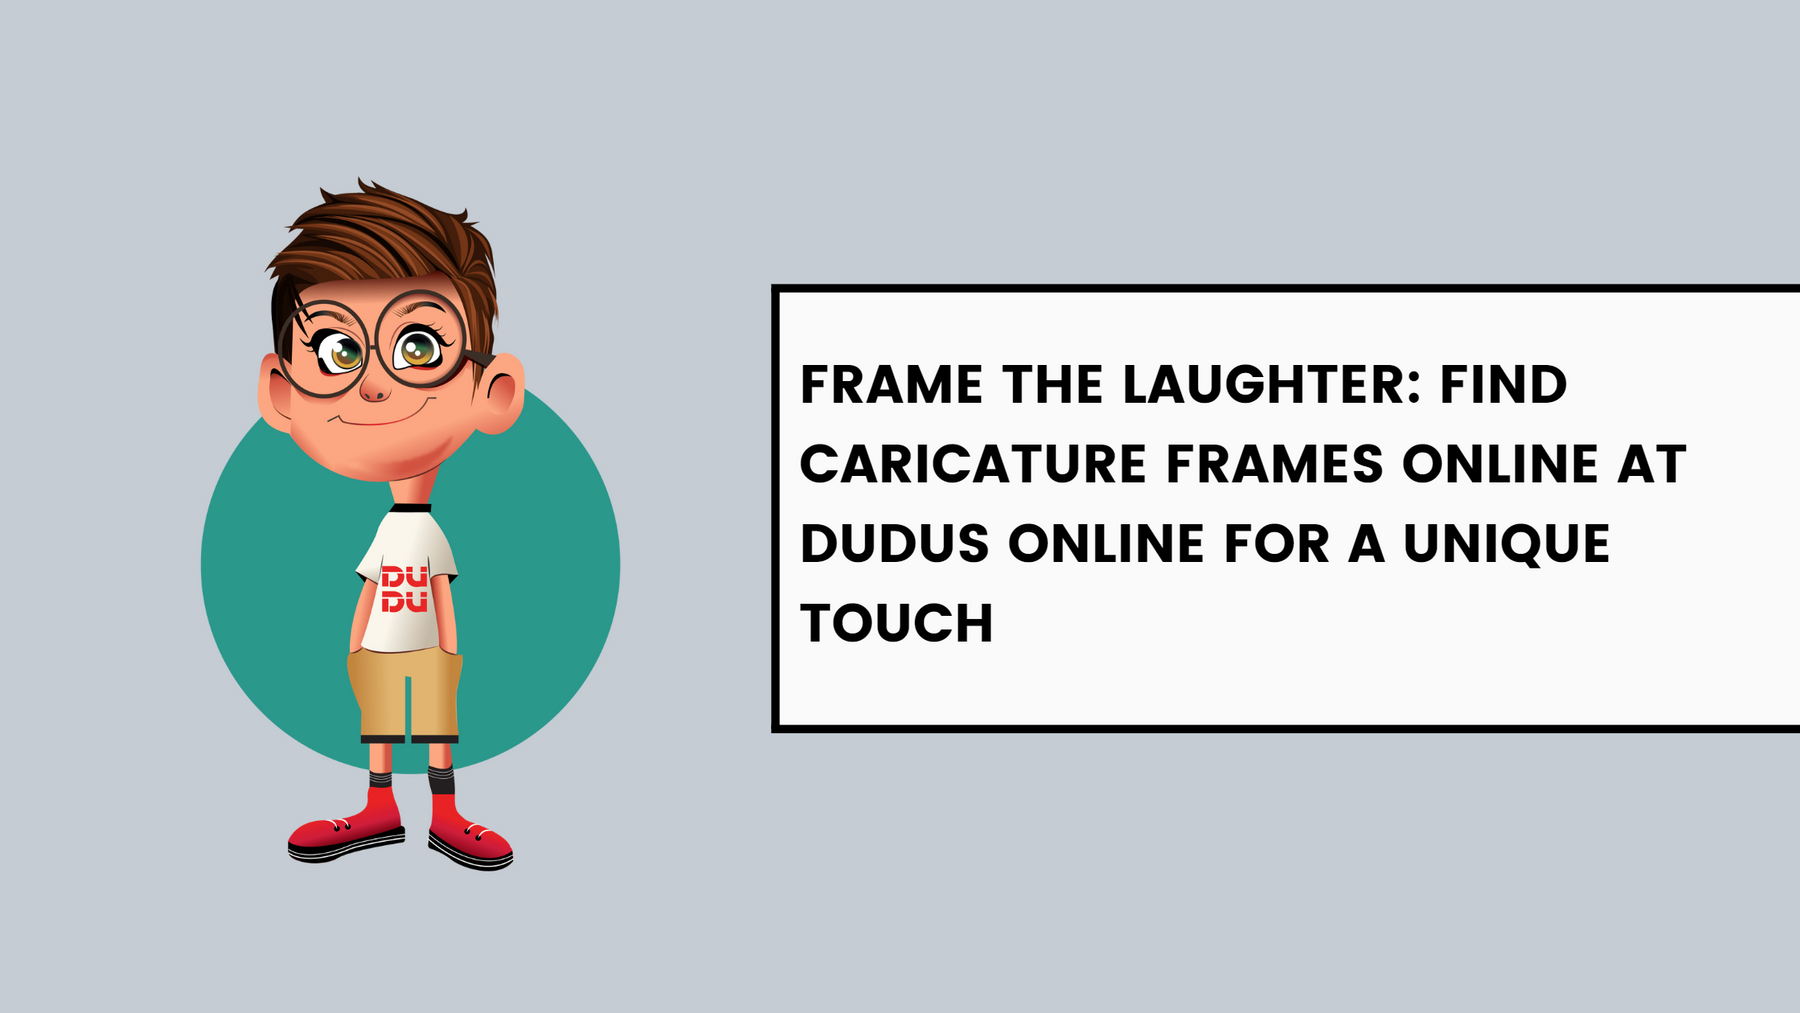 Frame The Laughter: Find Caricature Frames Online At Dudus Online For A Unique Touch